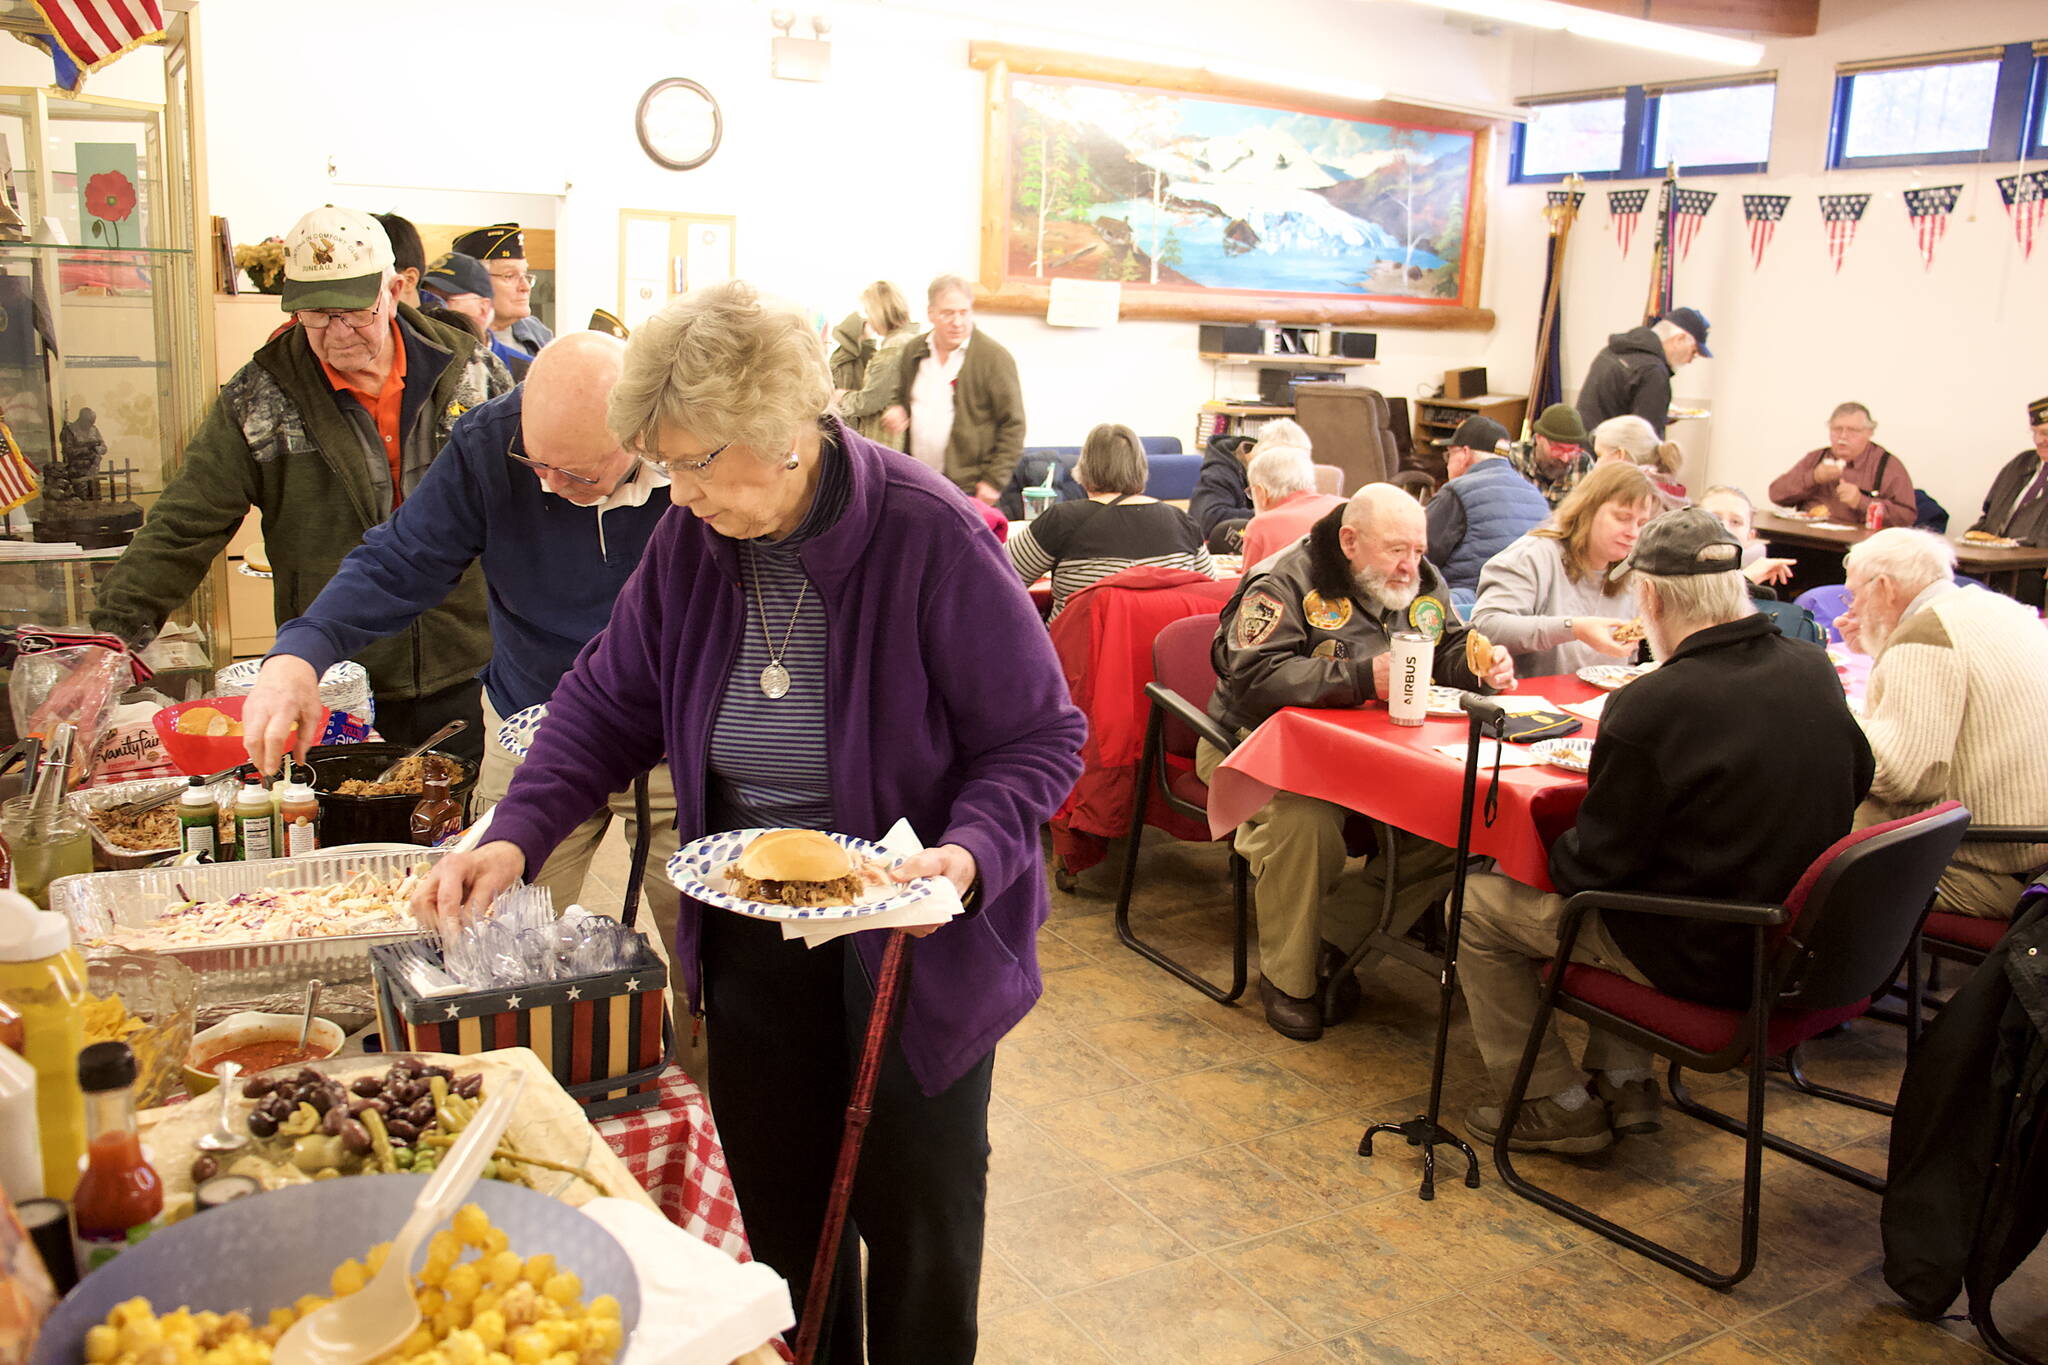 Military veterans, family members and others gather at American Legion Auke Bay Post 25 at midday Saturday for an annual Veterans Day lunchtime gathering. (Mark Sabbatini / Juneau Empire)